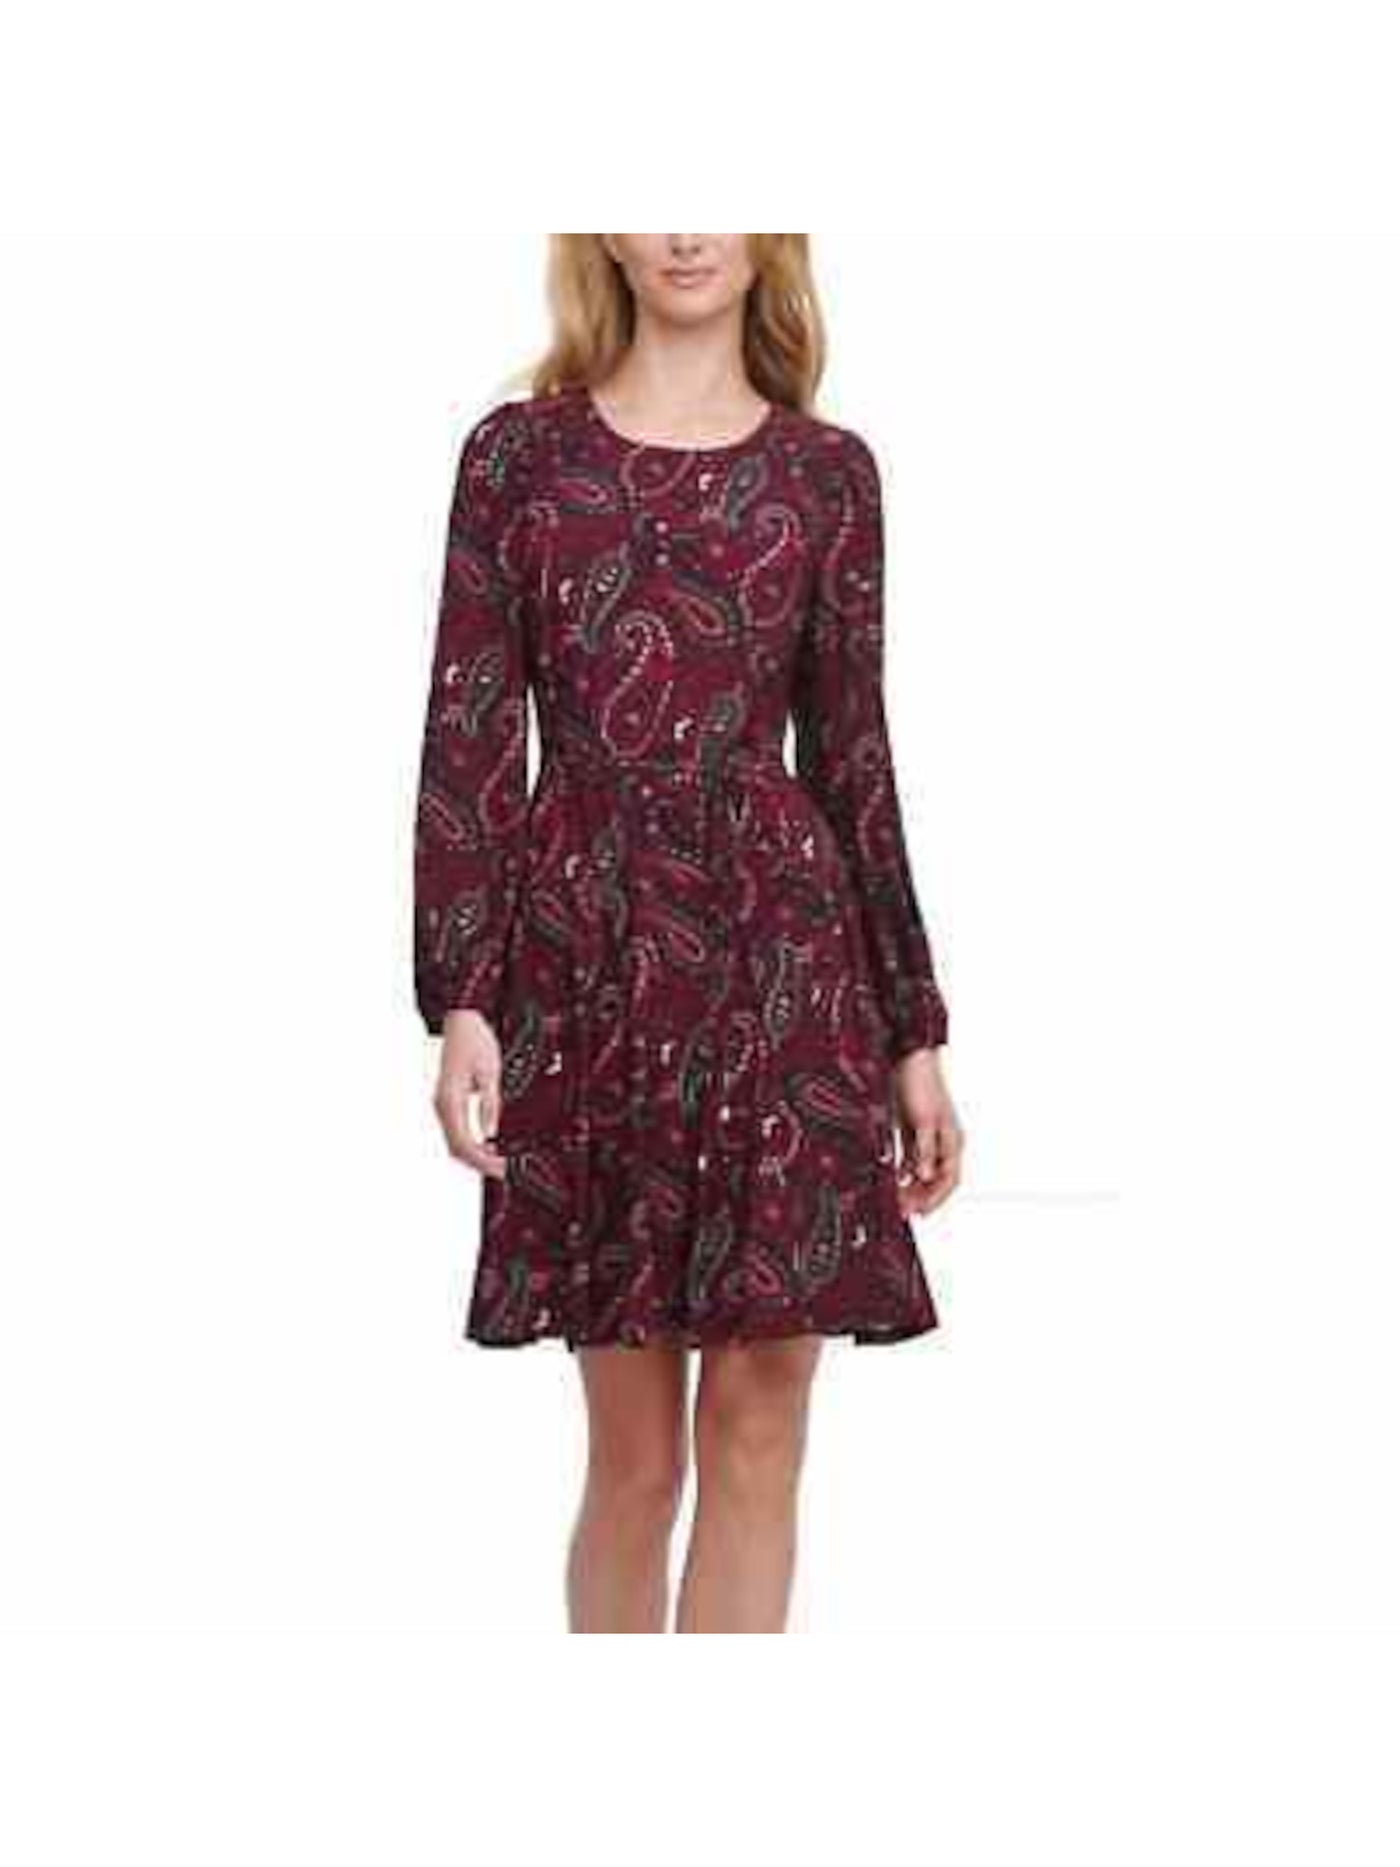 TOMMY HILFIGER Womens Burgundy Stretch Zippered Belted Paisley Long Sleeve Crew Neck Knee Length Wear To Work Fit + Flare Dress 10